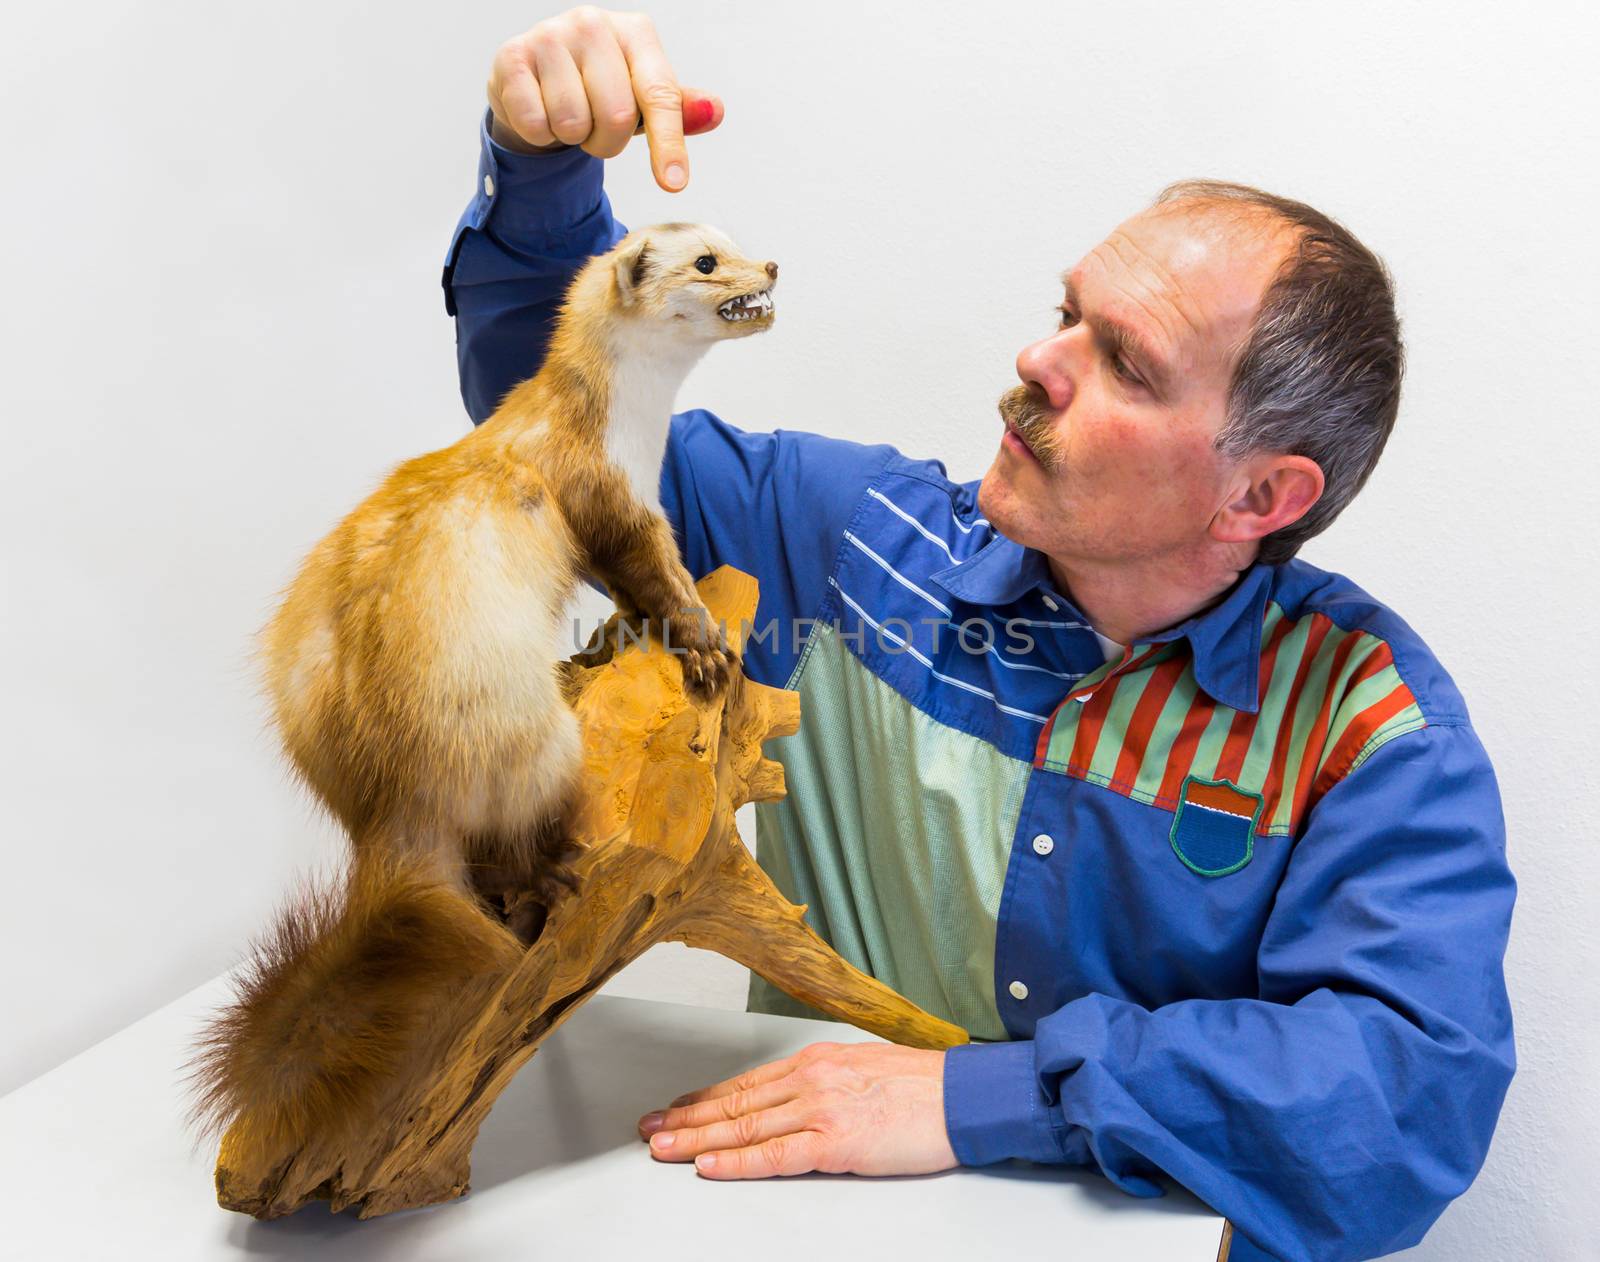 Man pointing at stuffed stone marten for education isolated on white background